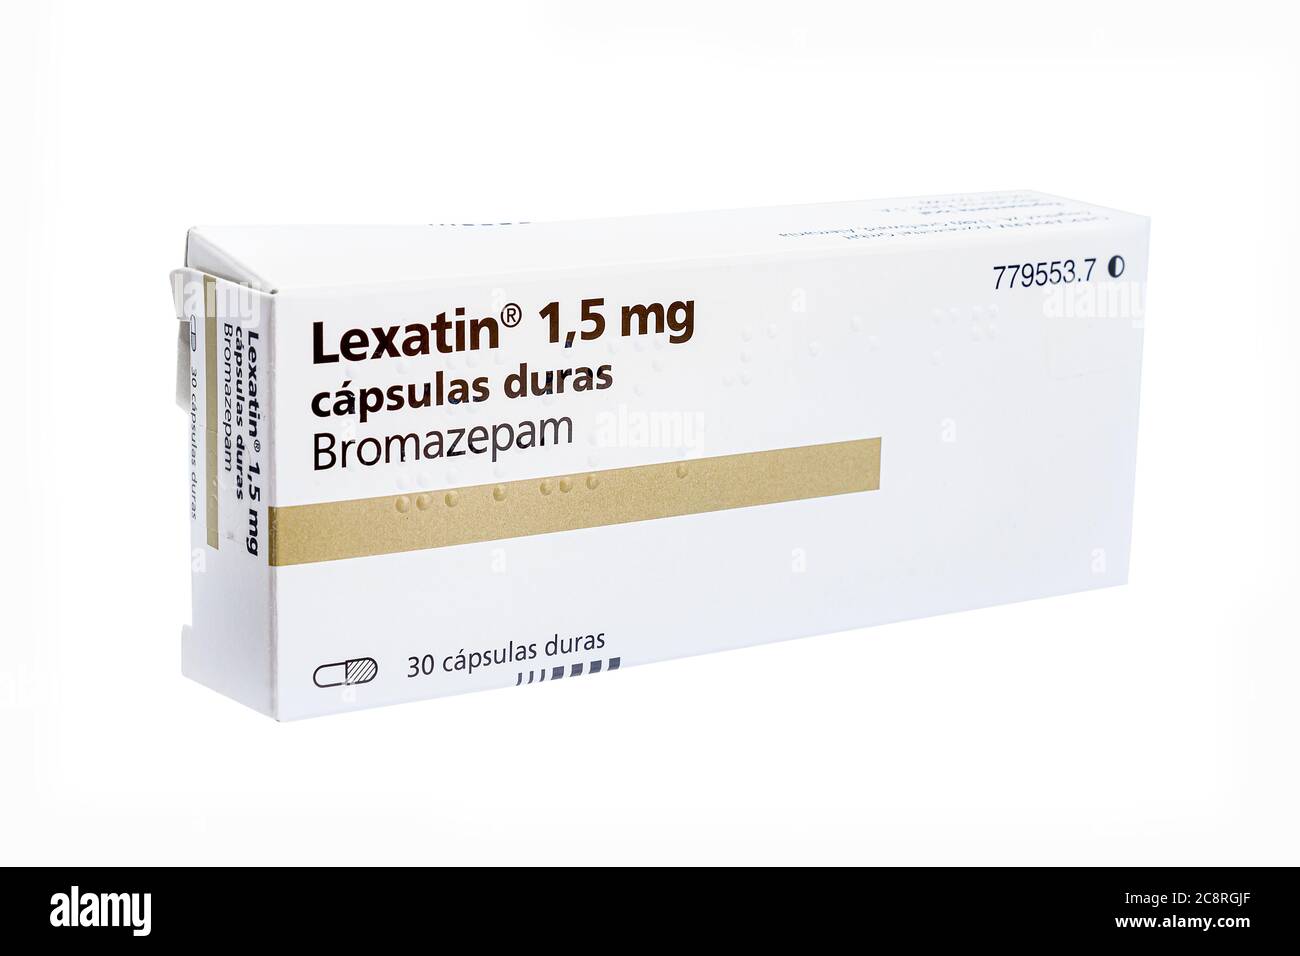 Huelva, Spain - July 23, 2020: Lexatin brand of Bromazepam. A benzodiazepine drug with anxiolytic, sedative, hypnotic and skeletal muscle relaxant pro Stock Photo